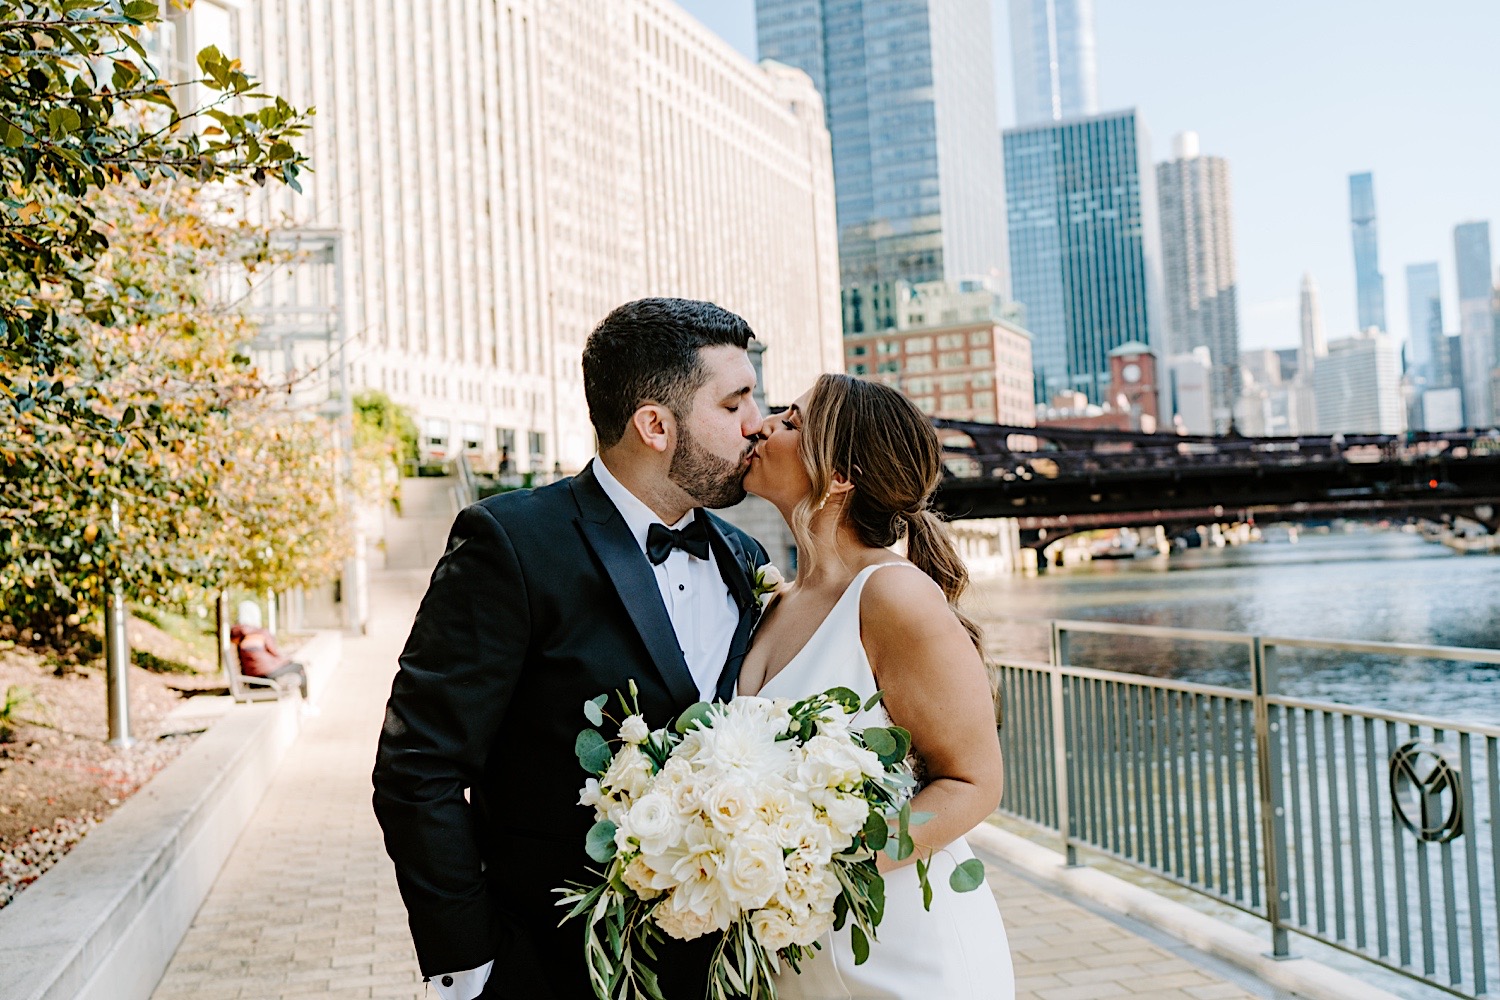 A bride and groom kiss one another while on a walkway next to the Chicago River before their wedding at the Voco Hotel